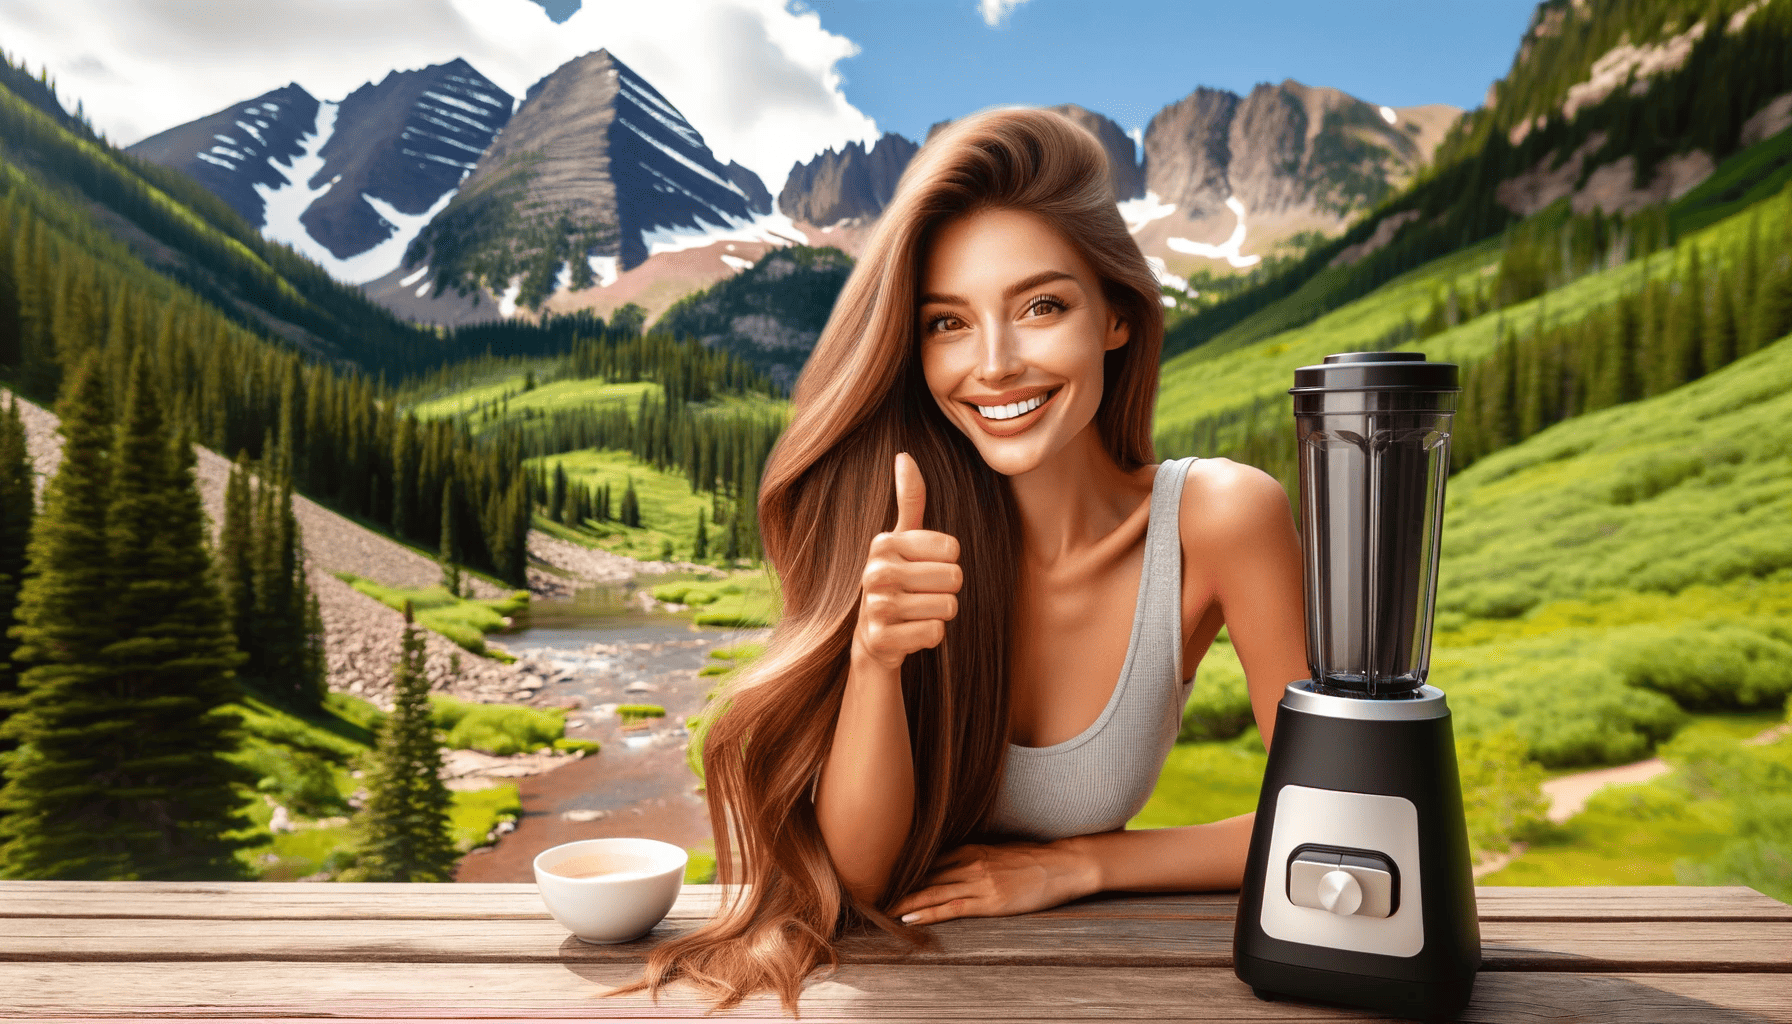 Personal Blenders For Colorado Living